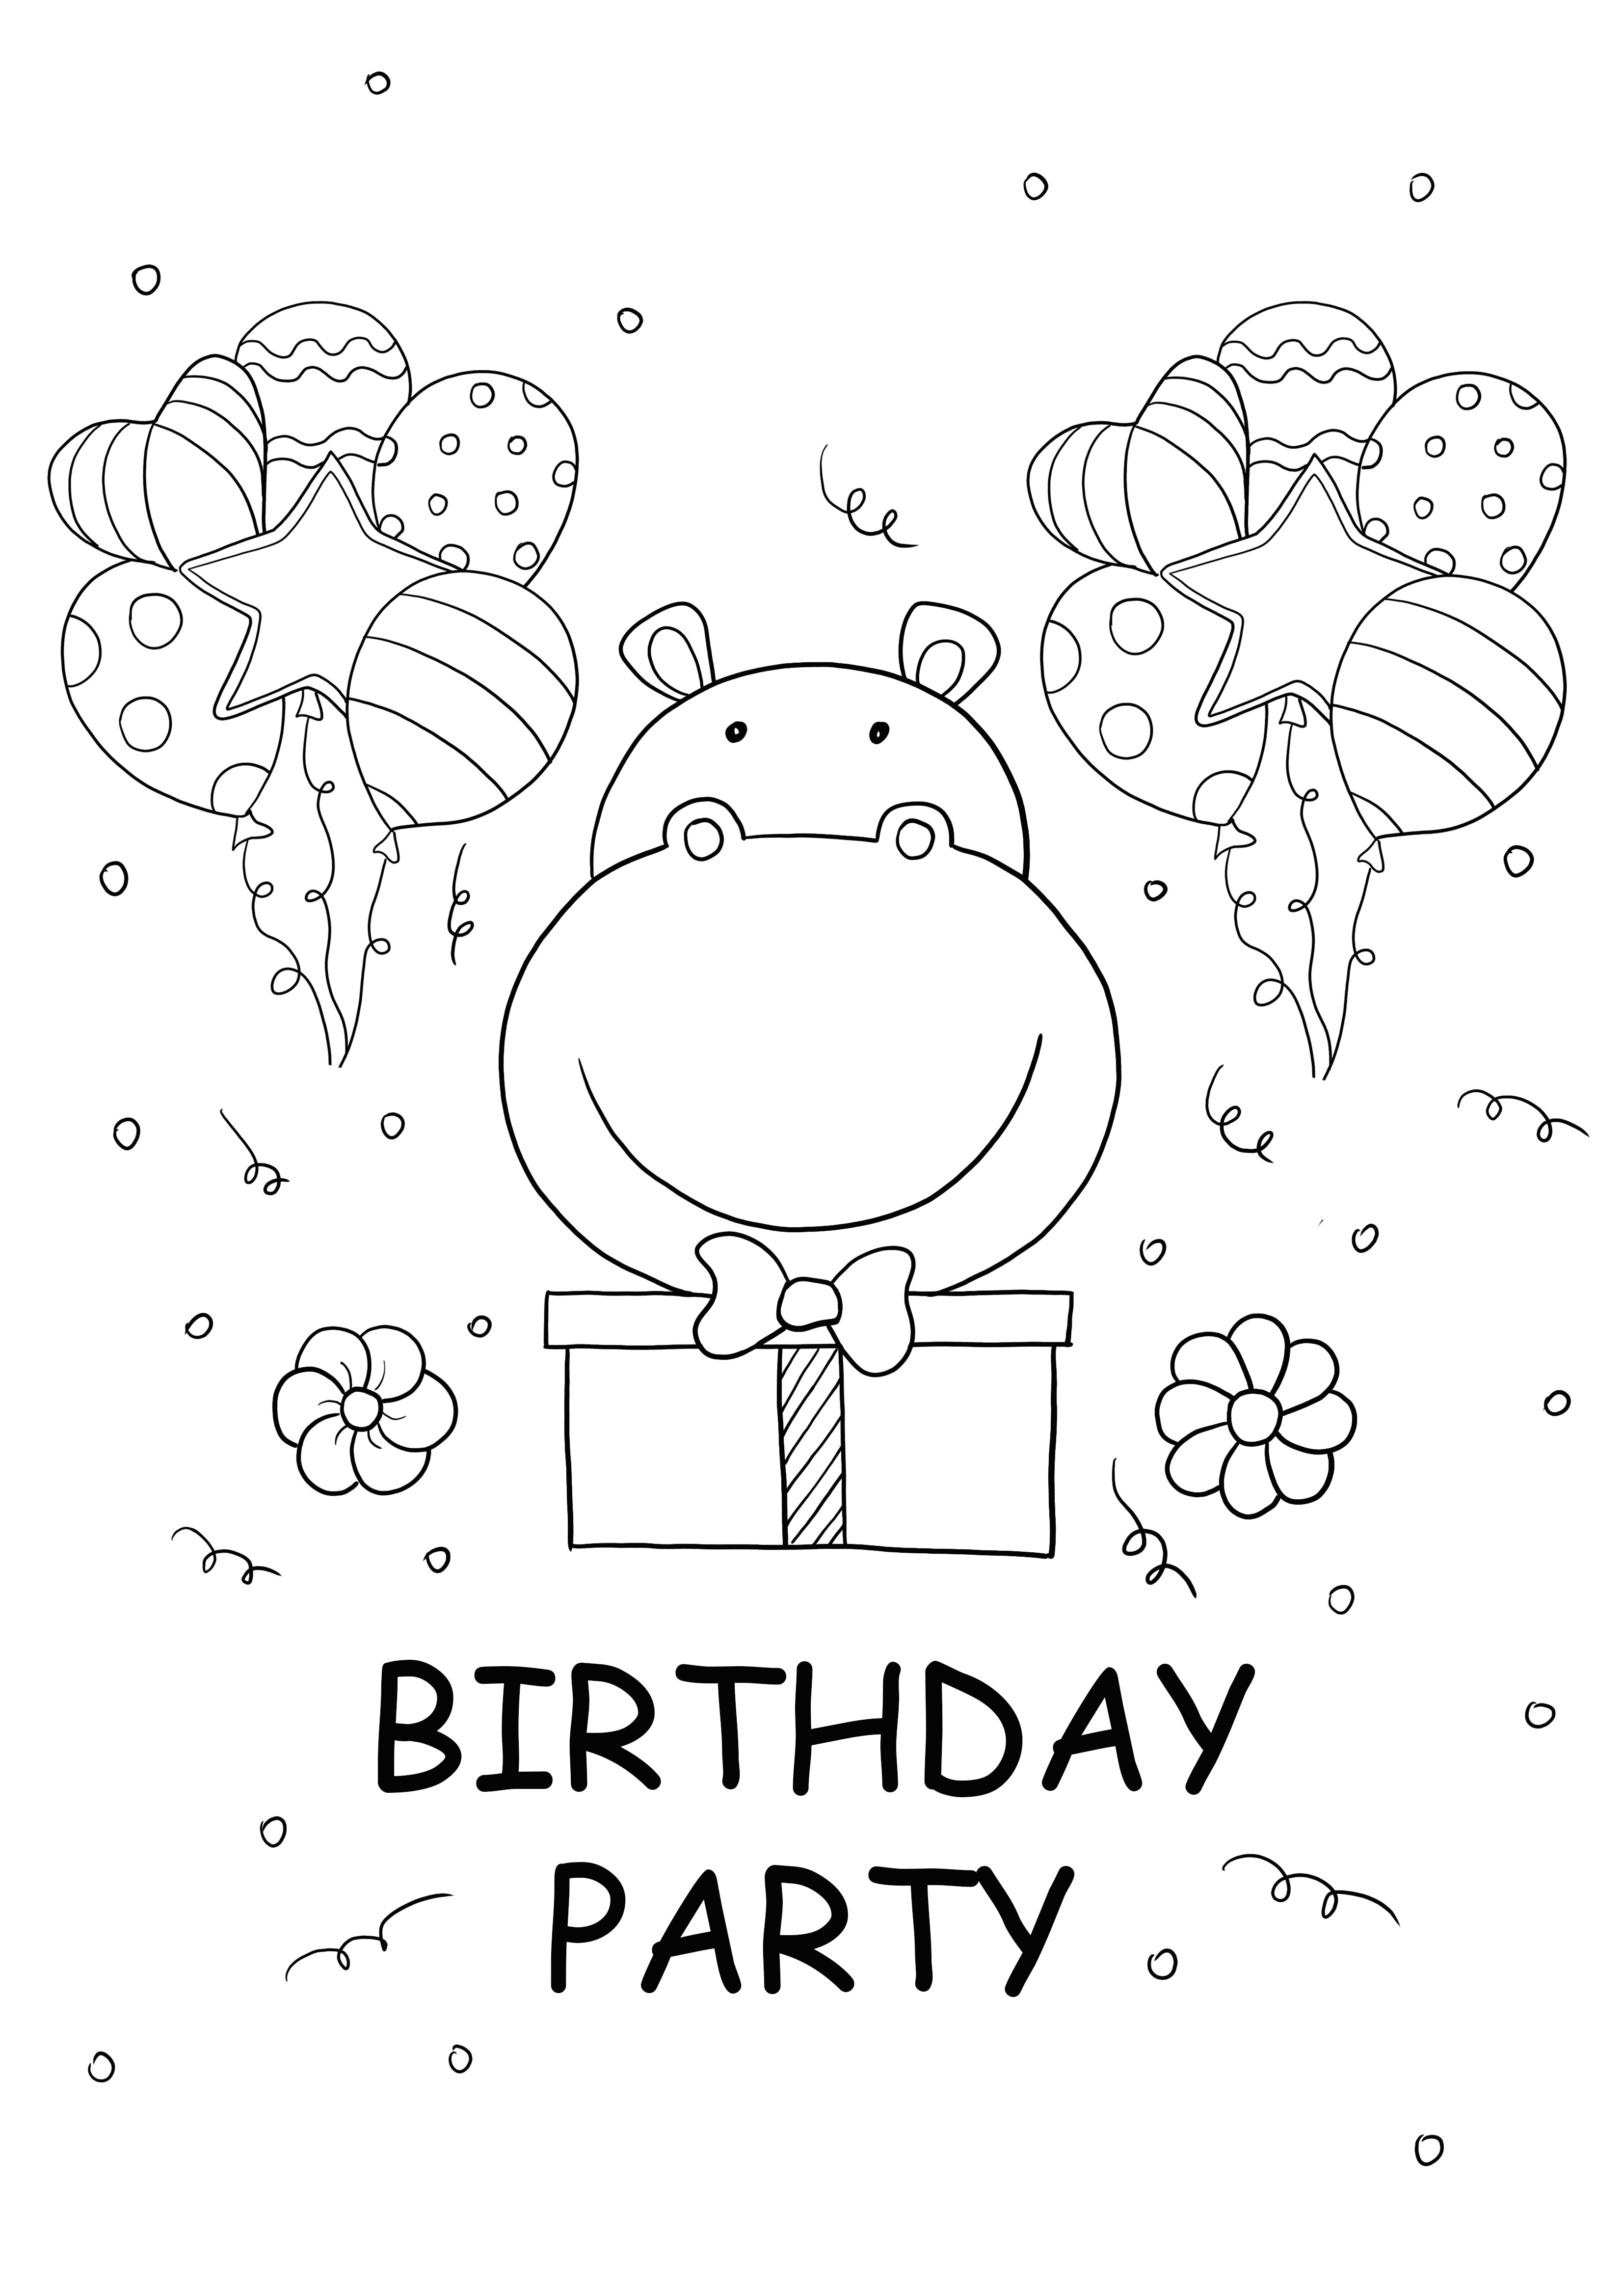 hippo and birthday party image free to print